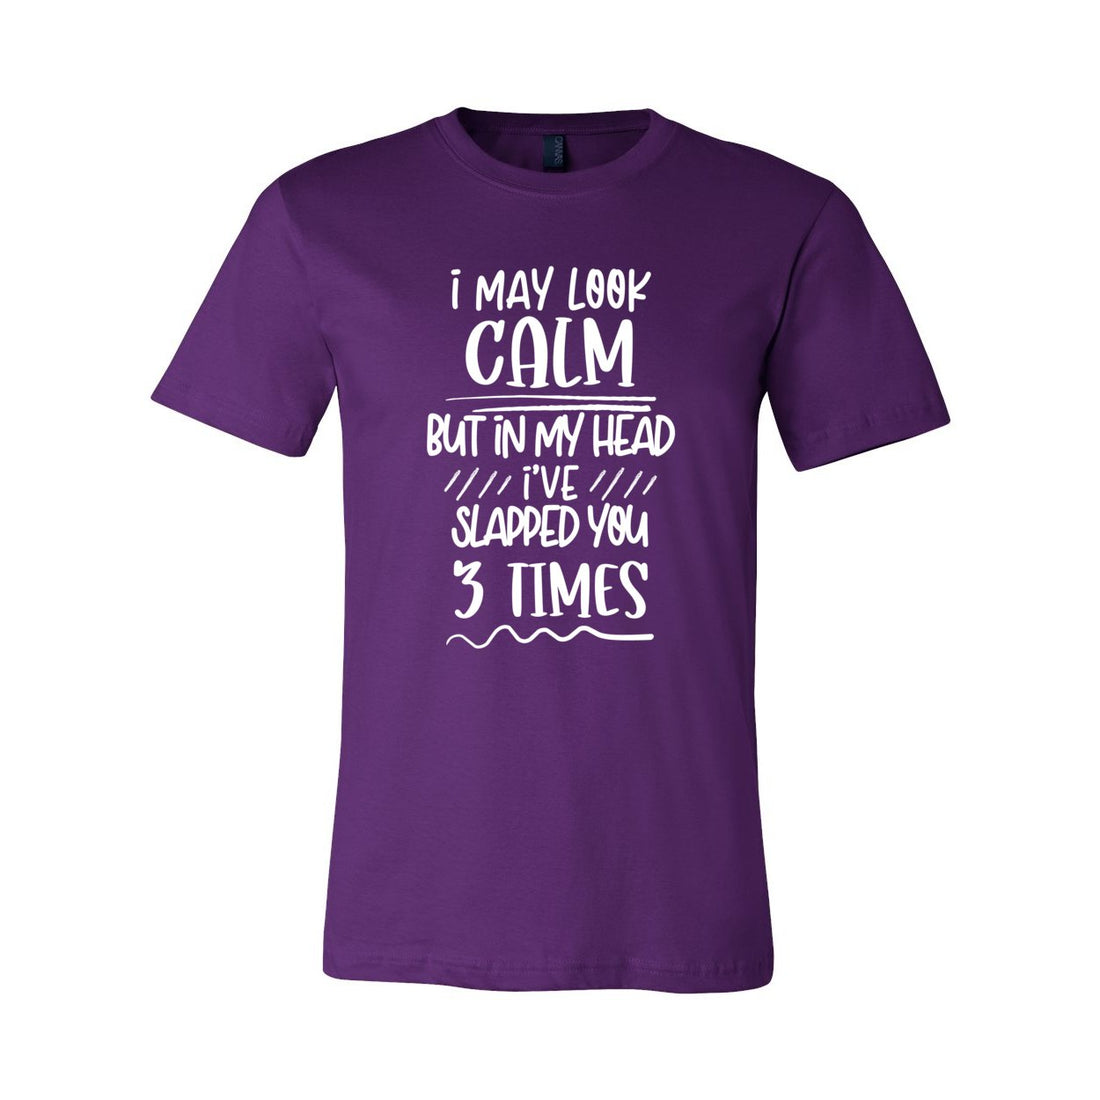 Look Calm Jersey Tee - T-Shirts - Positively Sassy - Look Calm Jersey Tee